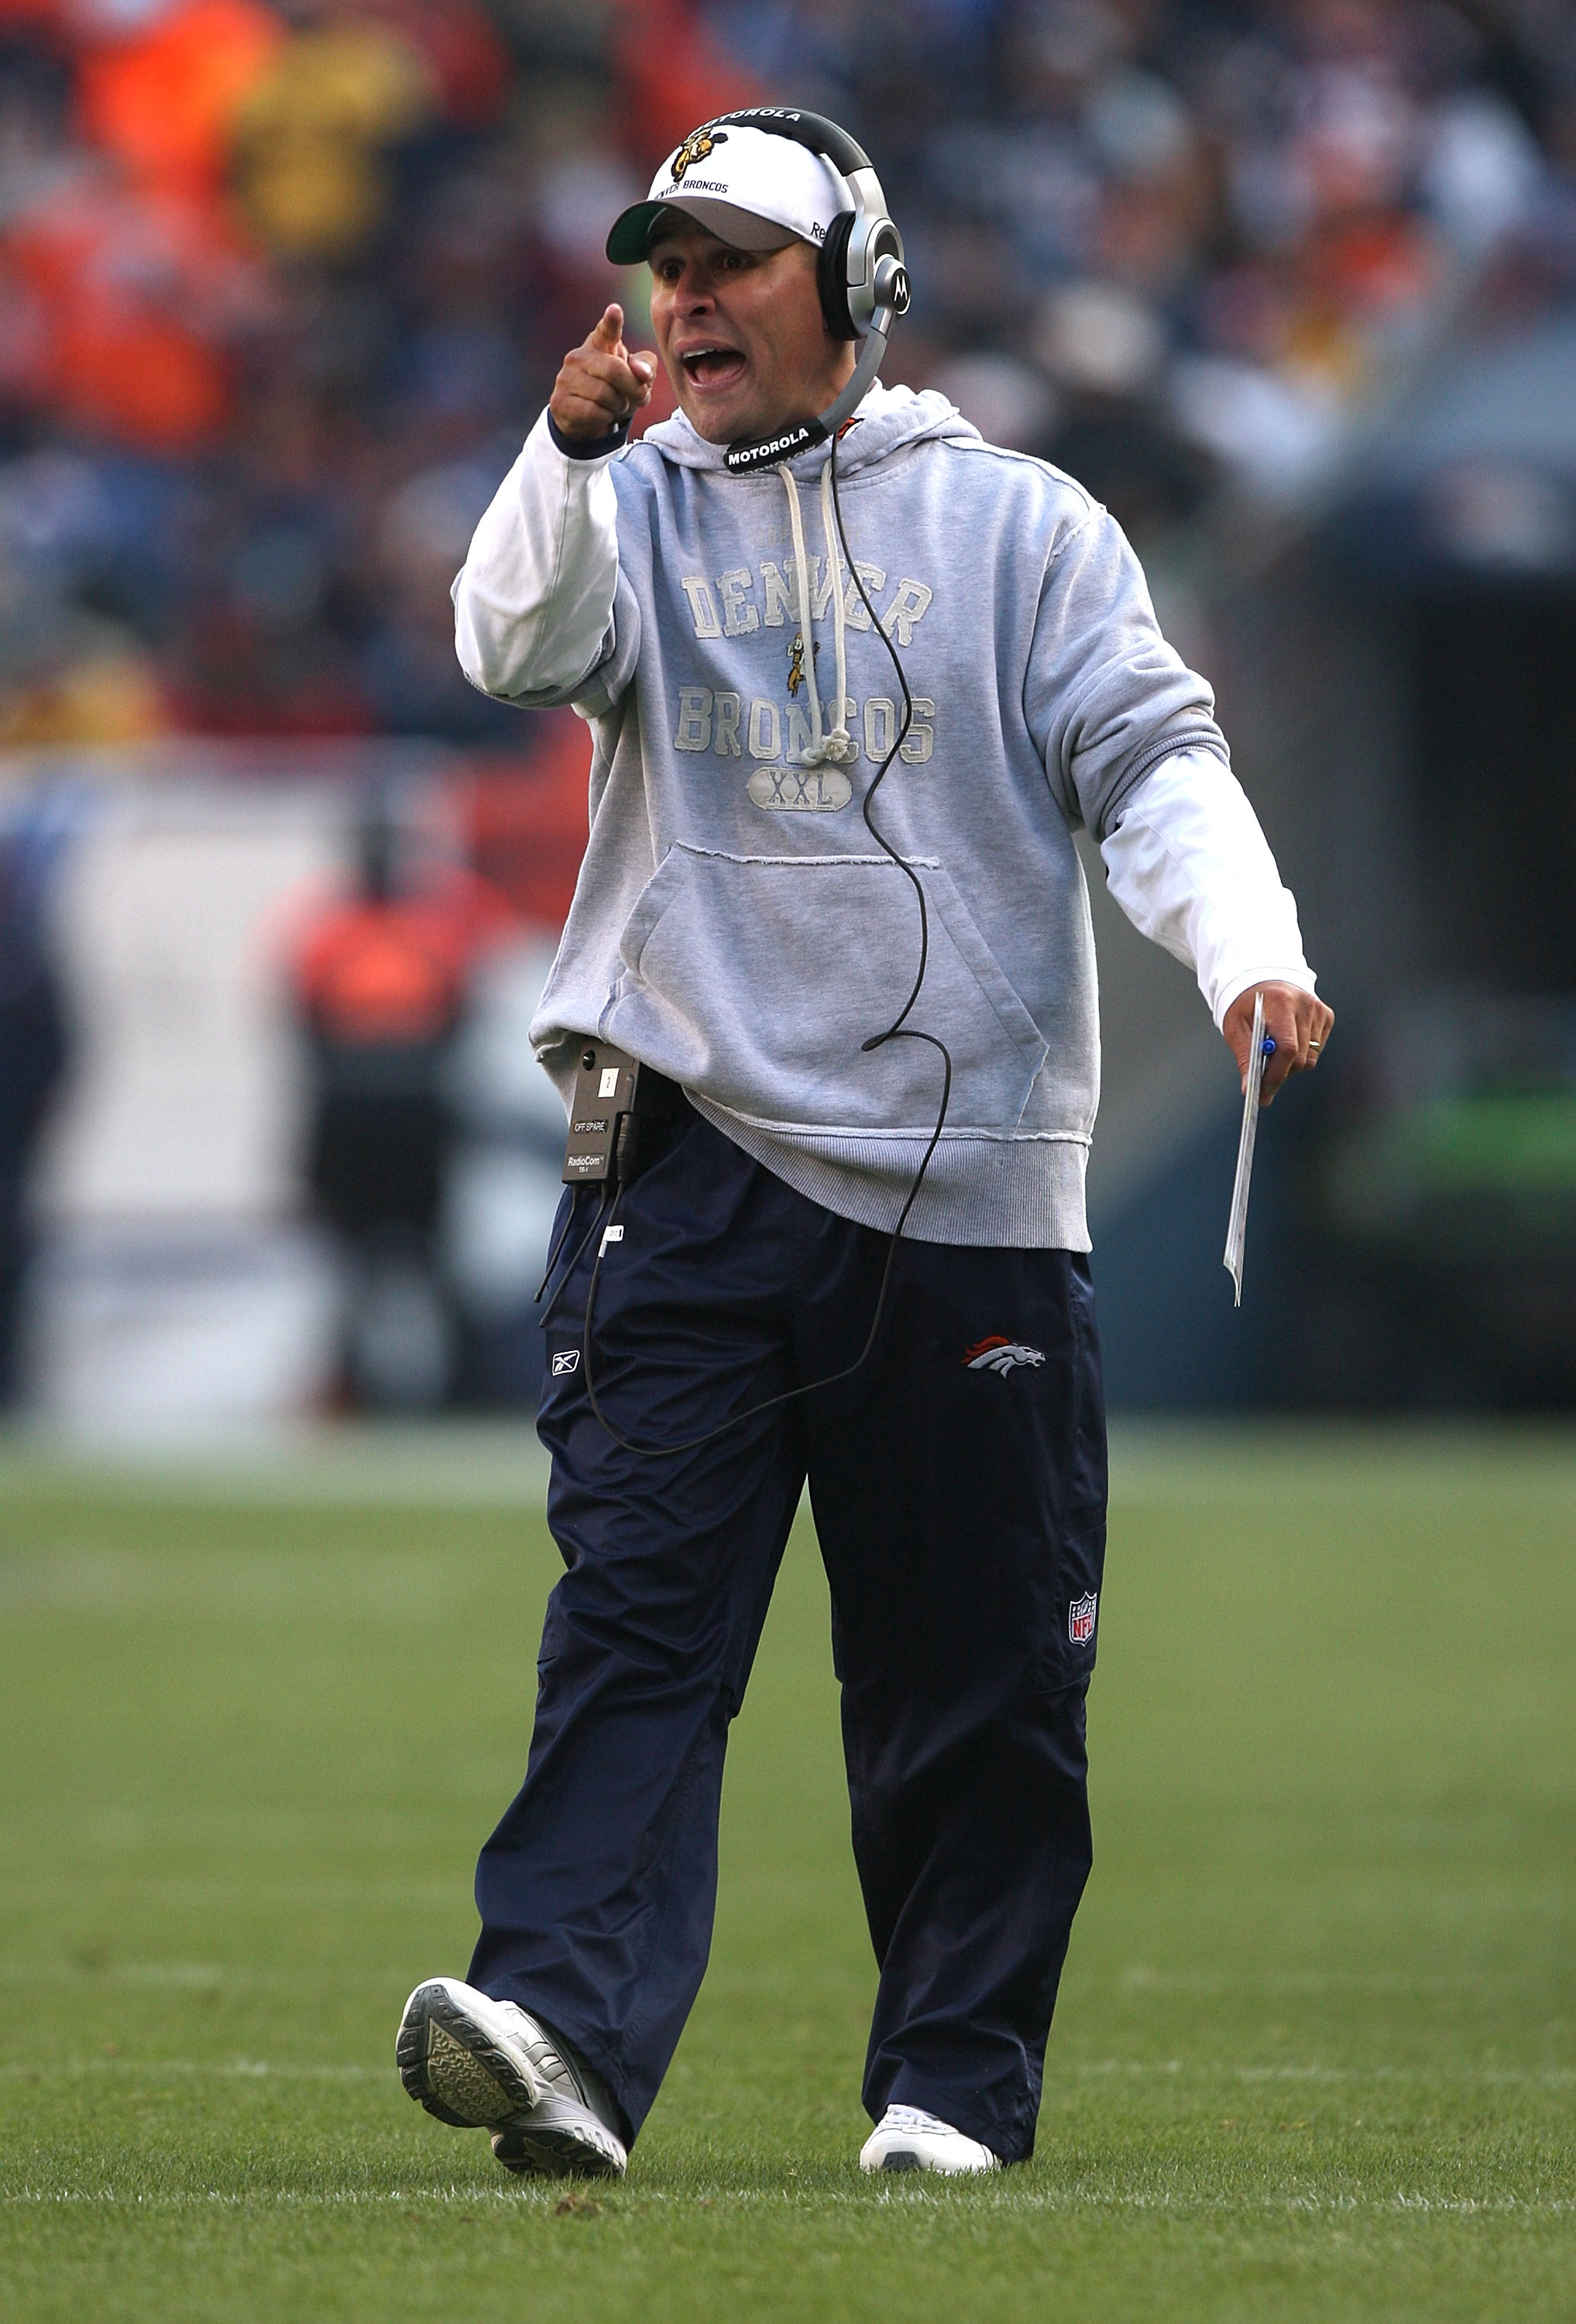 DENVER - OCTOBER 11:  Head coach Josh McDaniels of the Denver Broncos looks on against the New England Patriots during an NFL game at Invesco Field at Mile High on October 11, 2009 in Denver, Colorado.  (Photo by Jed Jacobsohn/Getty Images)